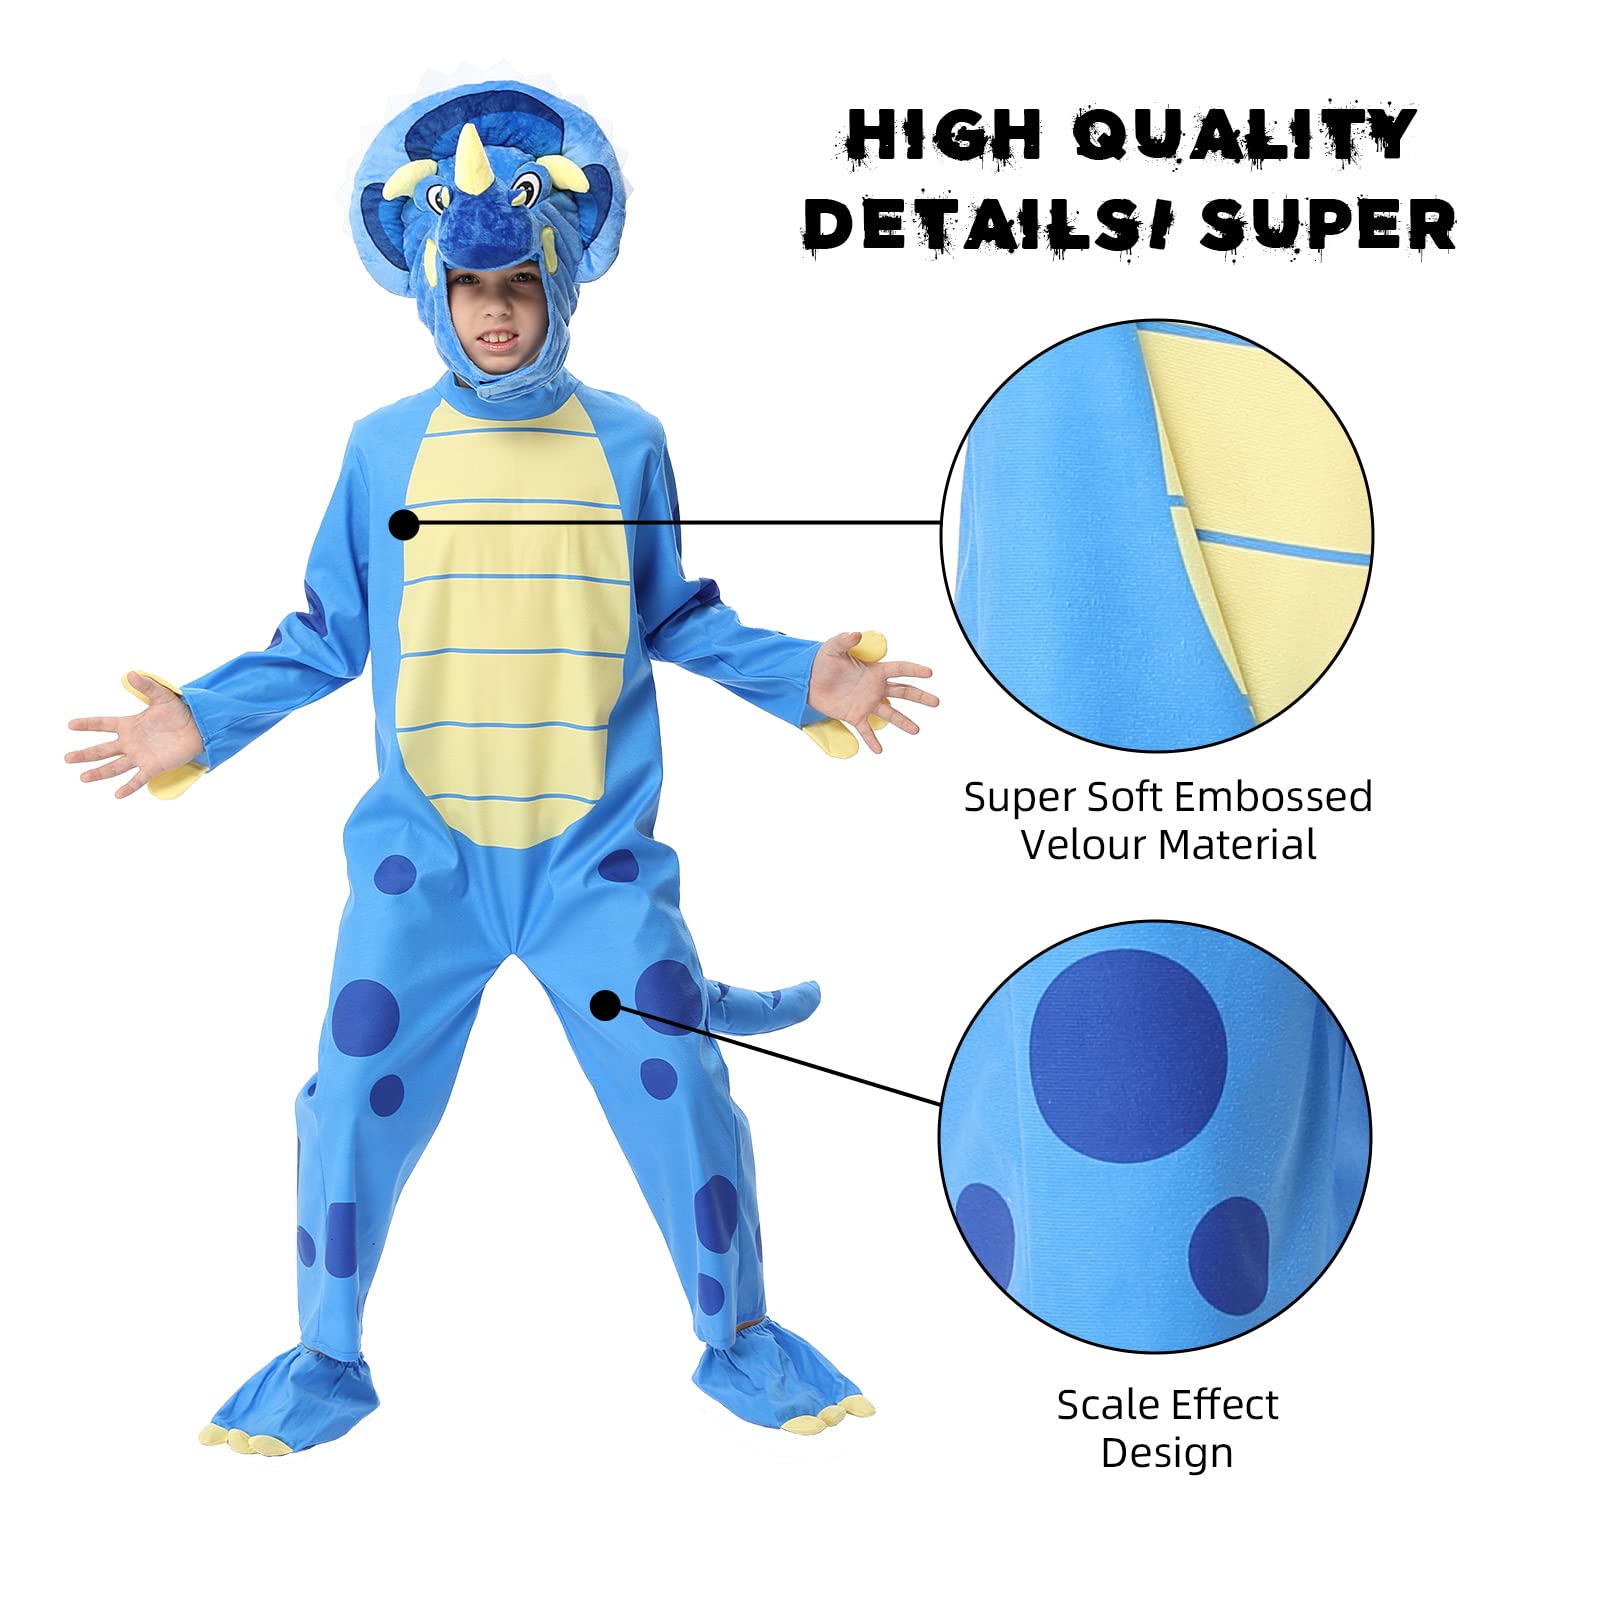 Geefia 1PACK Halloween Triceratops Deluxe Kids Dinosaur Costume for Halloween Dinosaur Dress Up Party(Blue/Yellow,T)